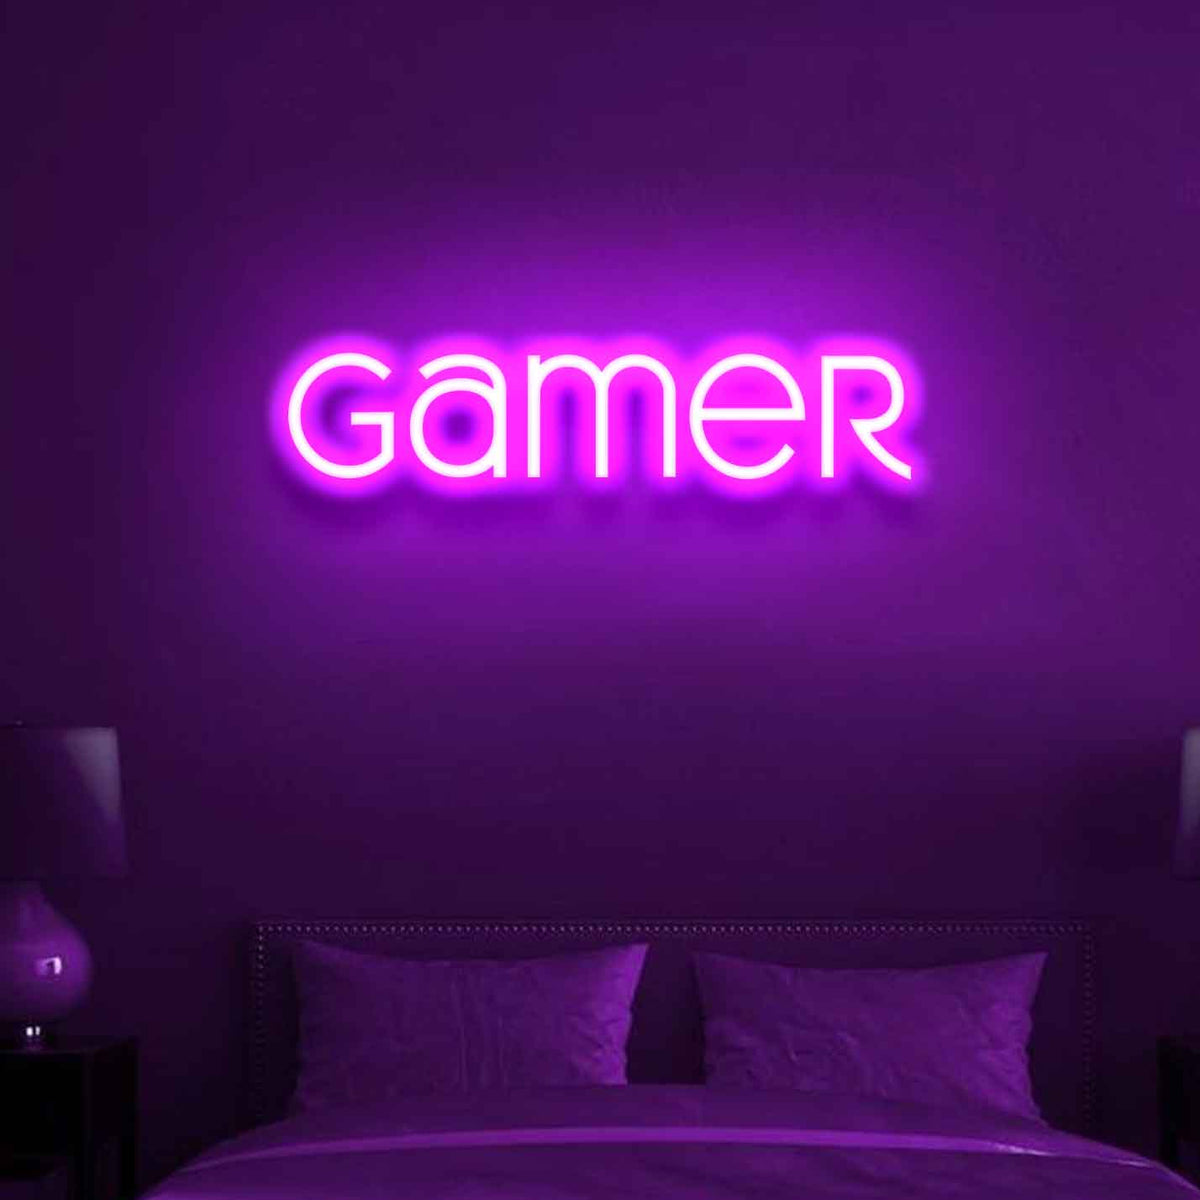 GAMER Small Neon Sign